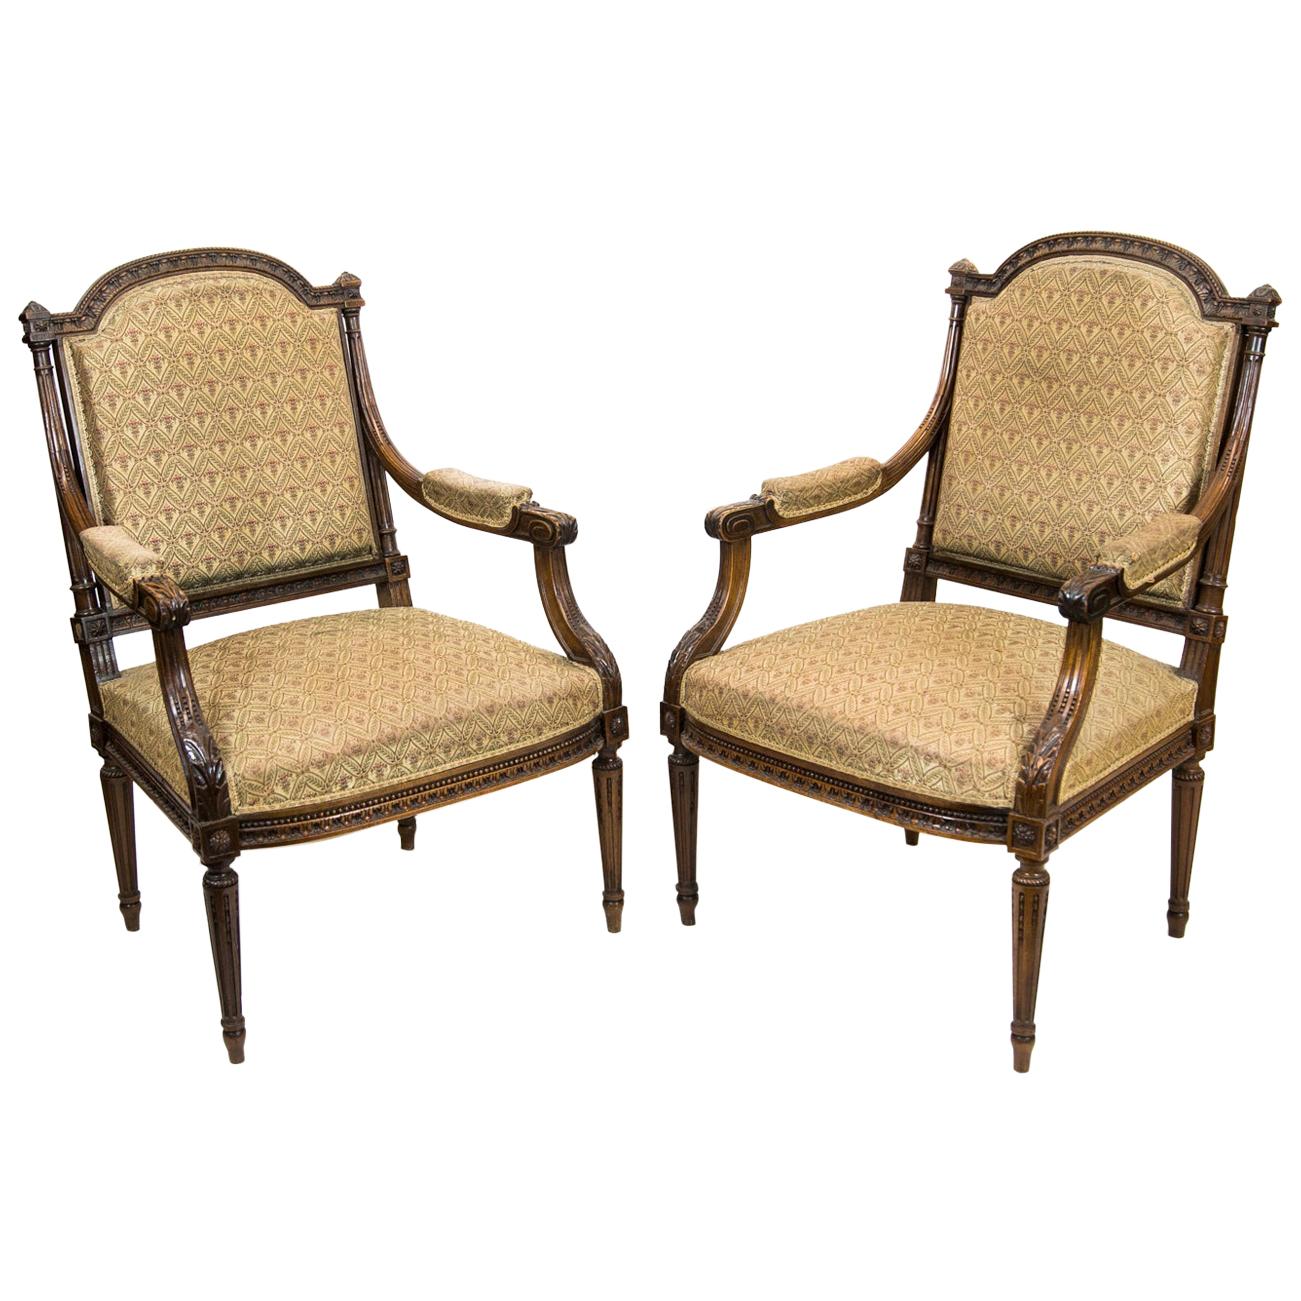 Pair of French Walnut Carved Armchairs